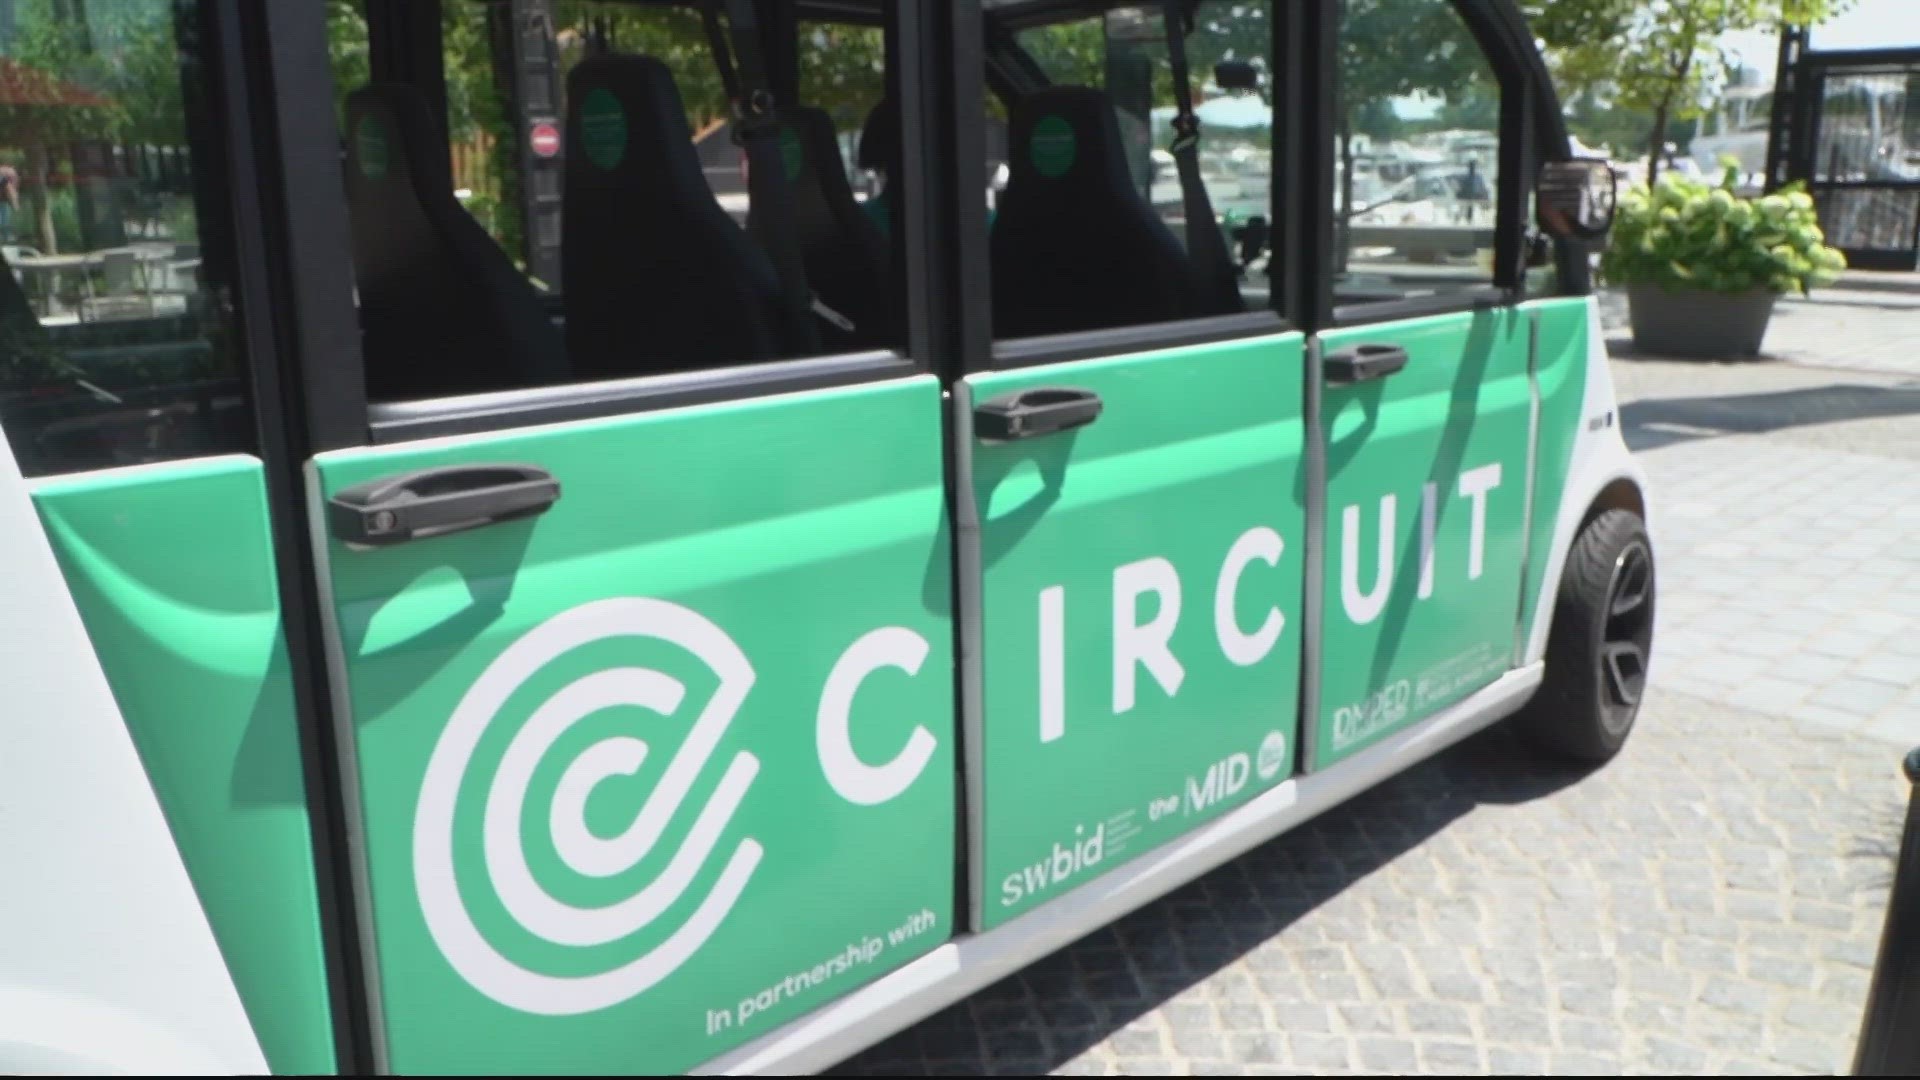 Travel around SW DC in the new eco-friendly Circuit shuttle